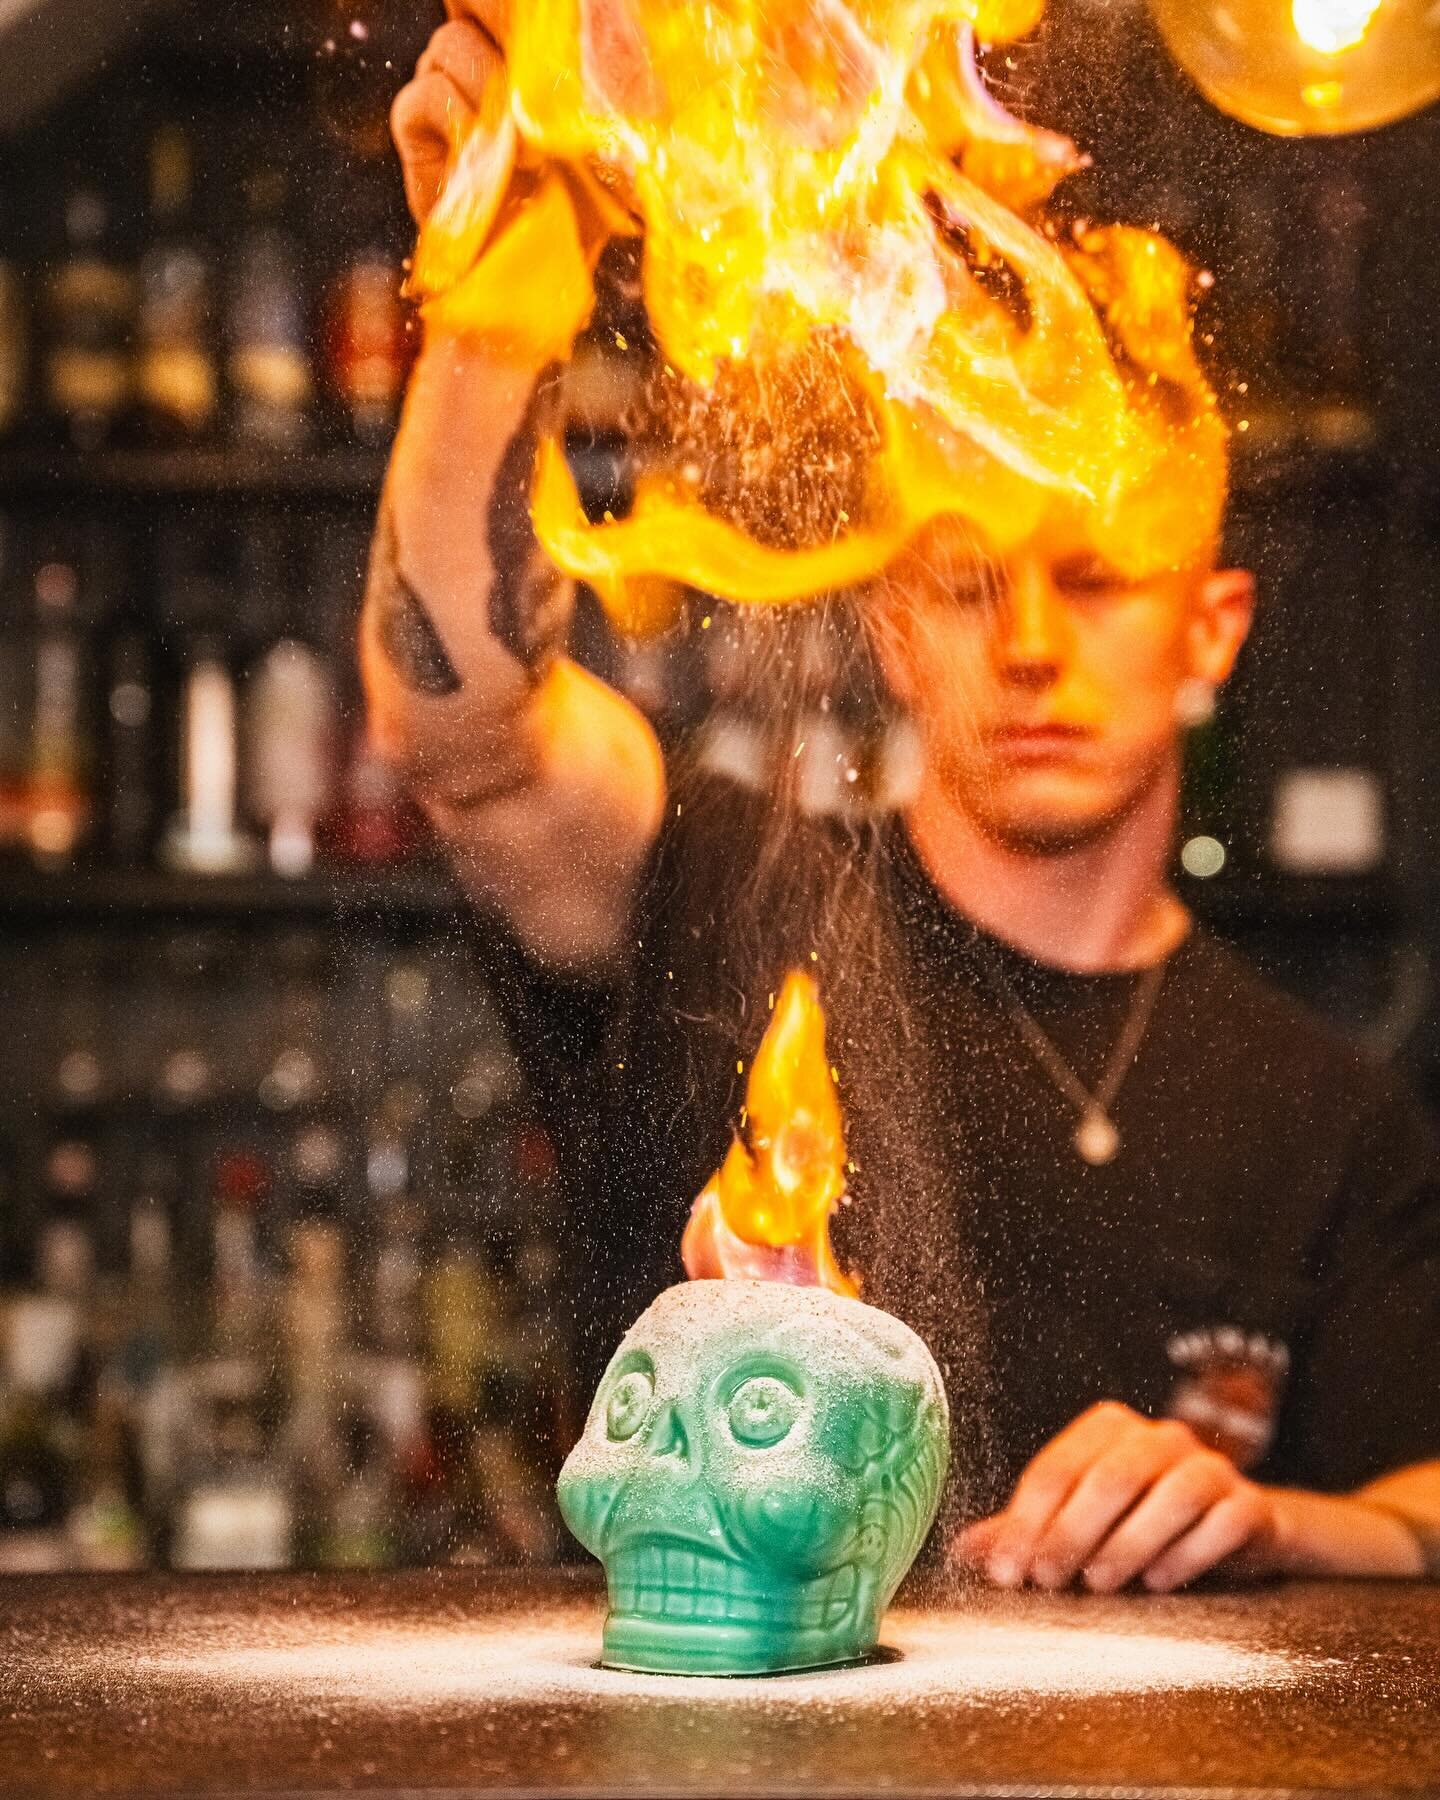 NEW MENU LAUNCH 🔥 
We&rsquo;re launching our new cocktail menu this Wednesday!! 
To help our team get used to the changeover, we&rsquo;re offering a 35% discount on both new cocktails and all food, for being good sports and for your patience!

Booki